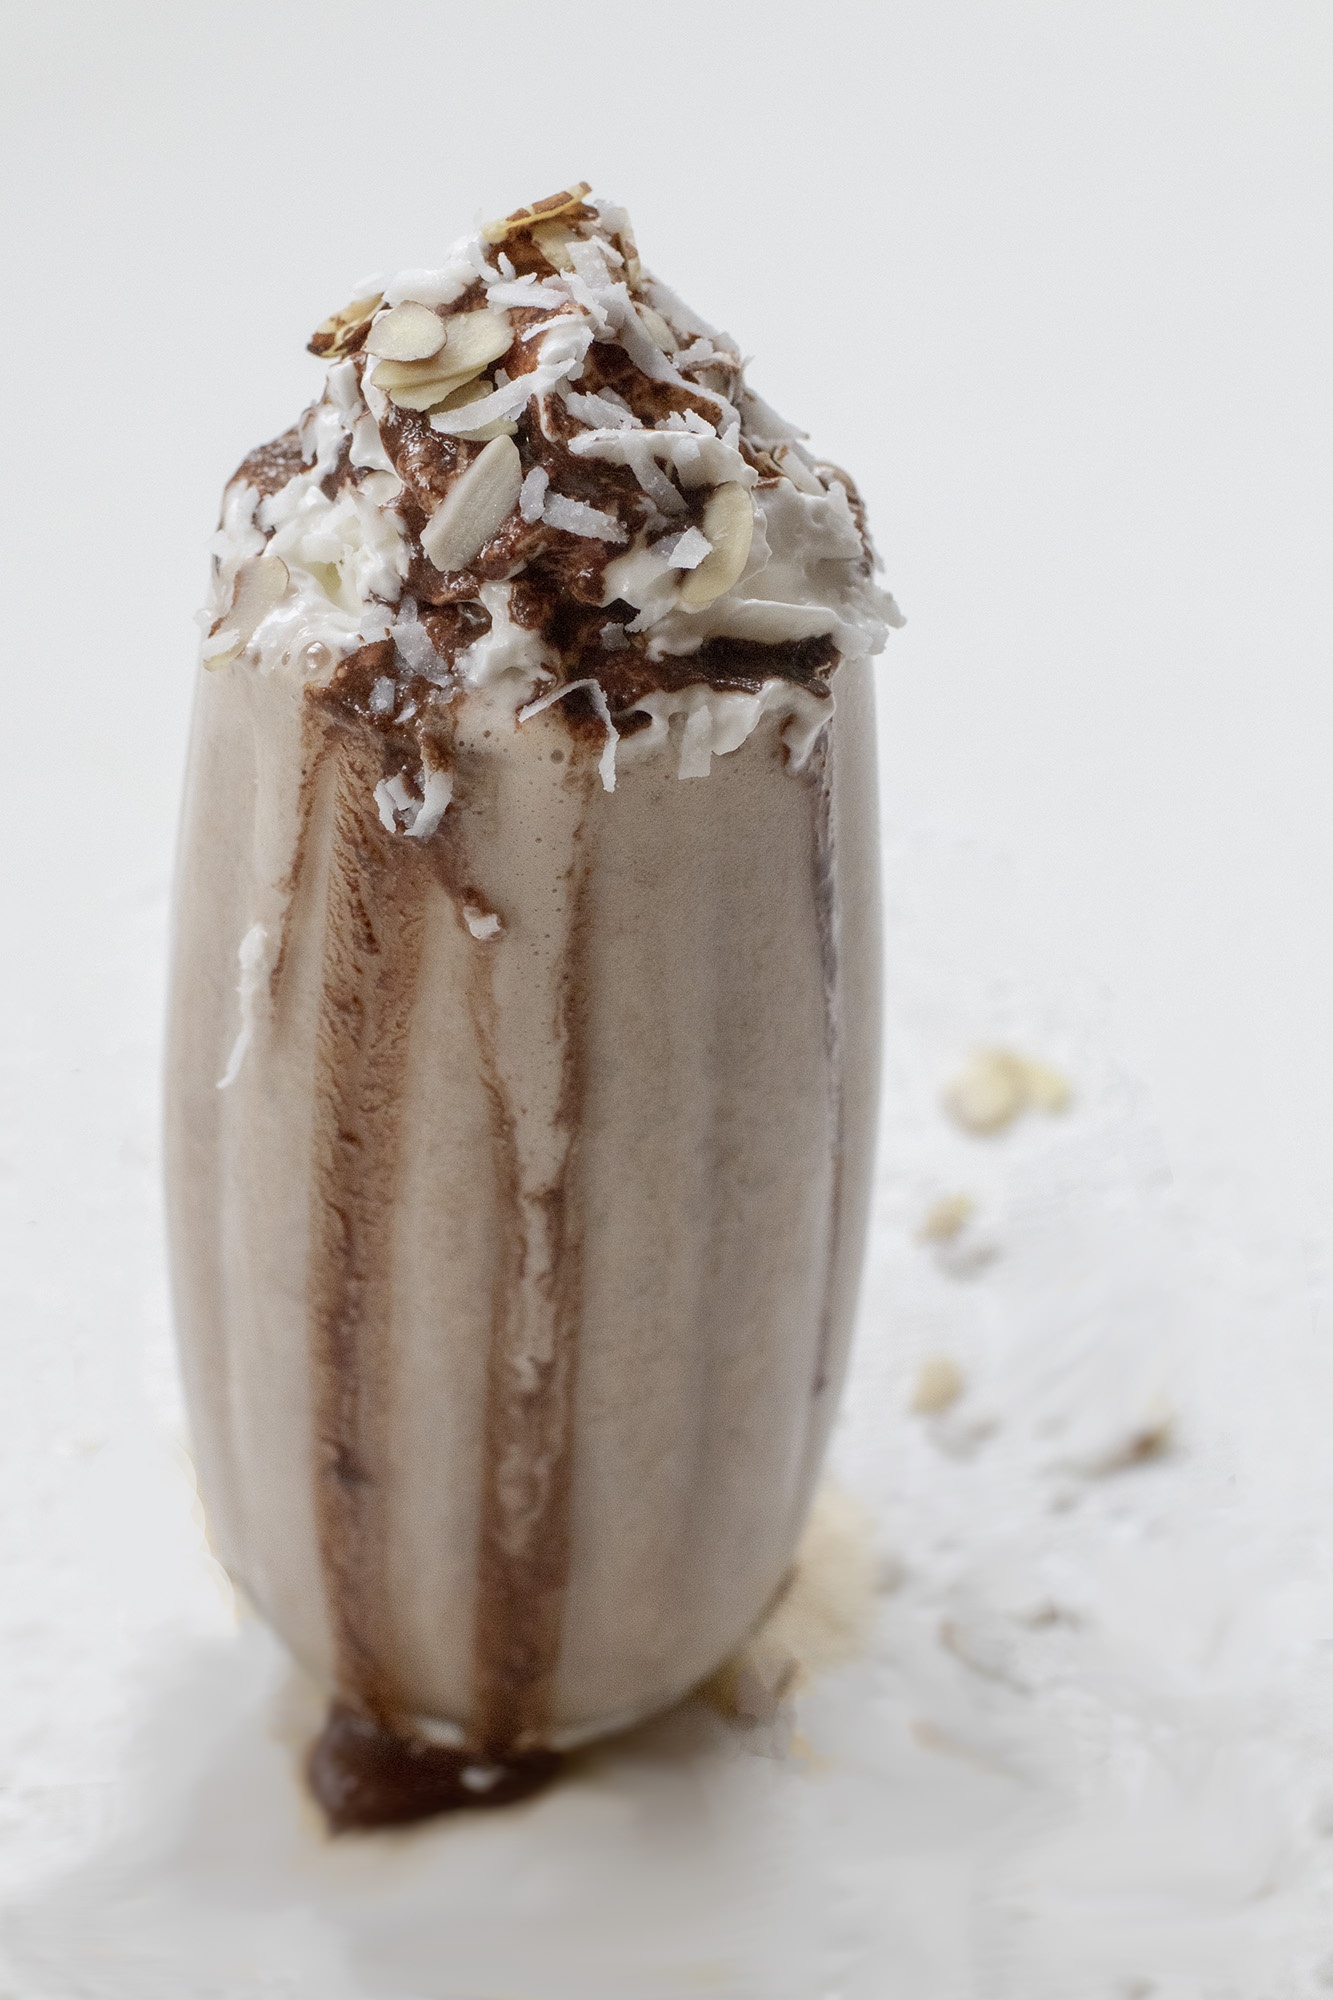 Chocolate Milkshake with whipped topping, sliced almonds, and shredded coconut on a white background.